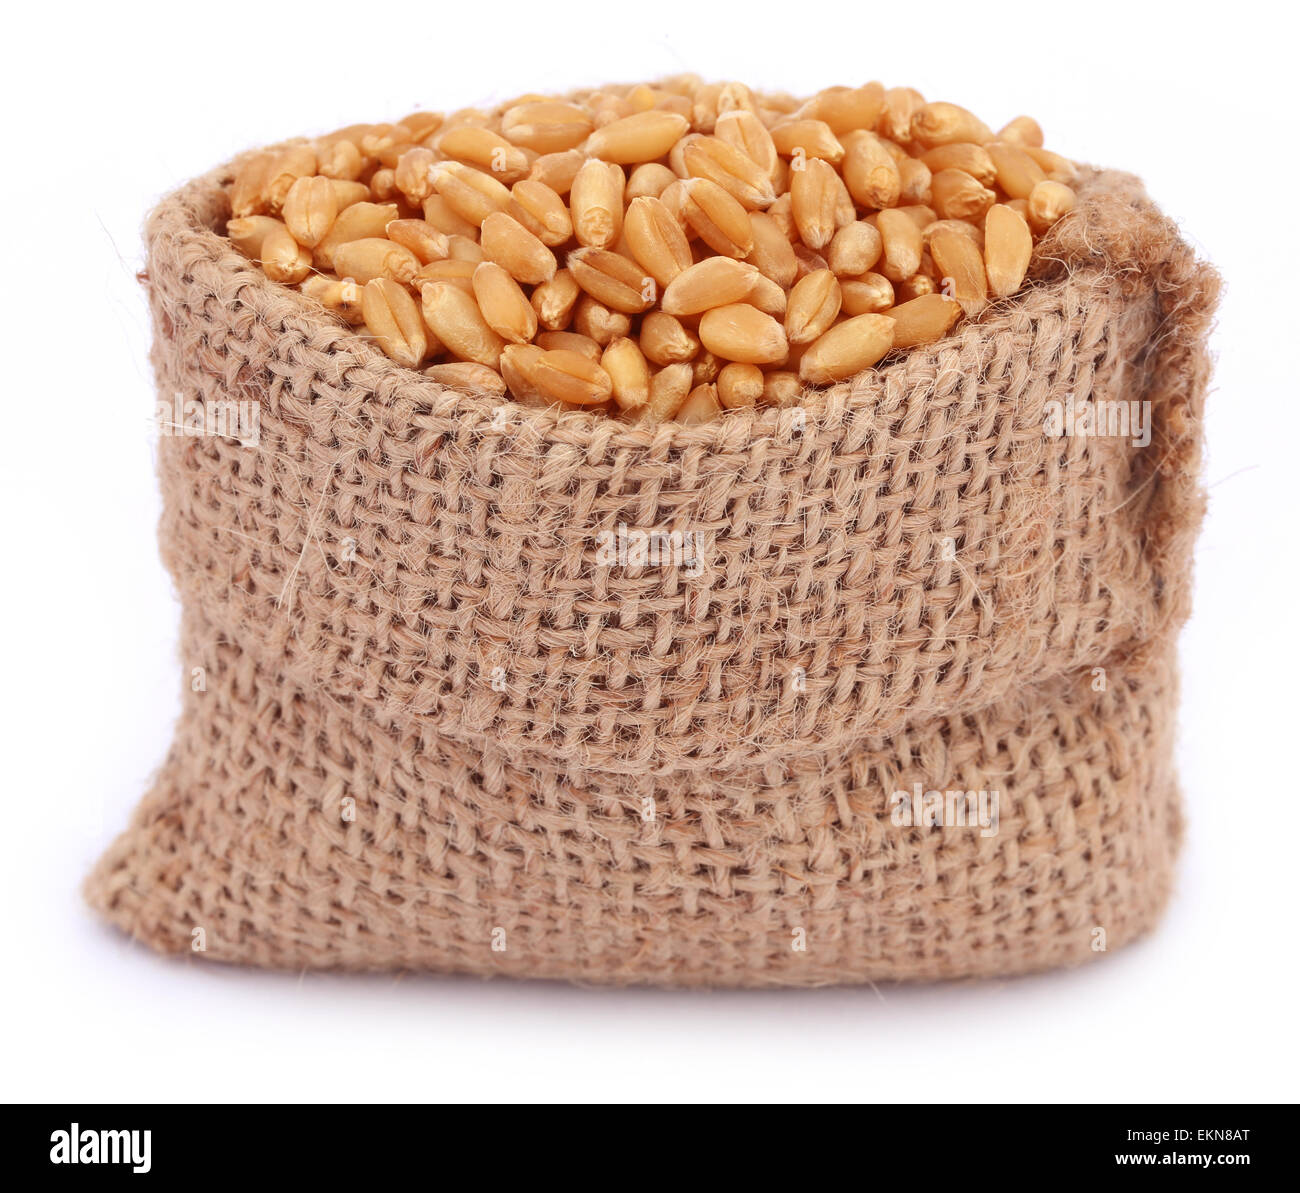 Wheat in a sack bag over white background Stock Photo